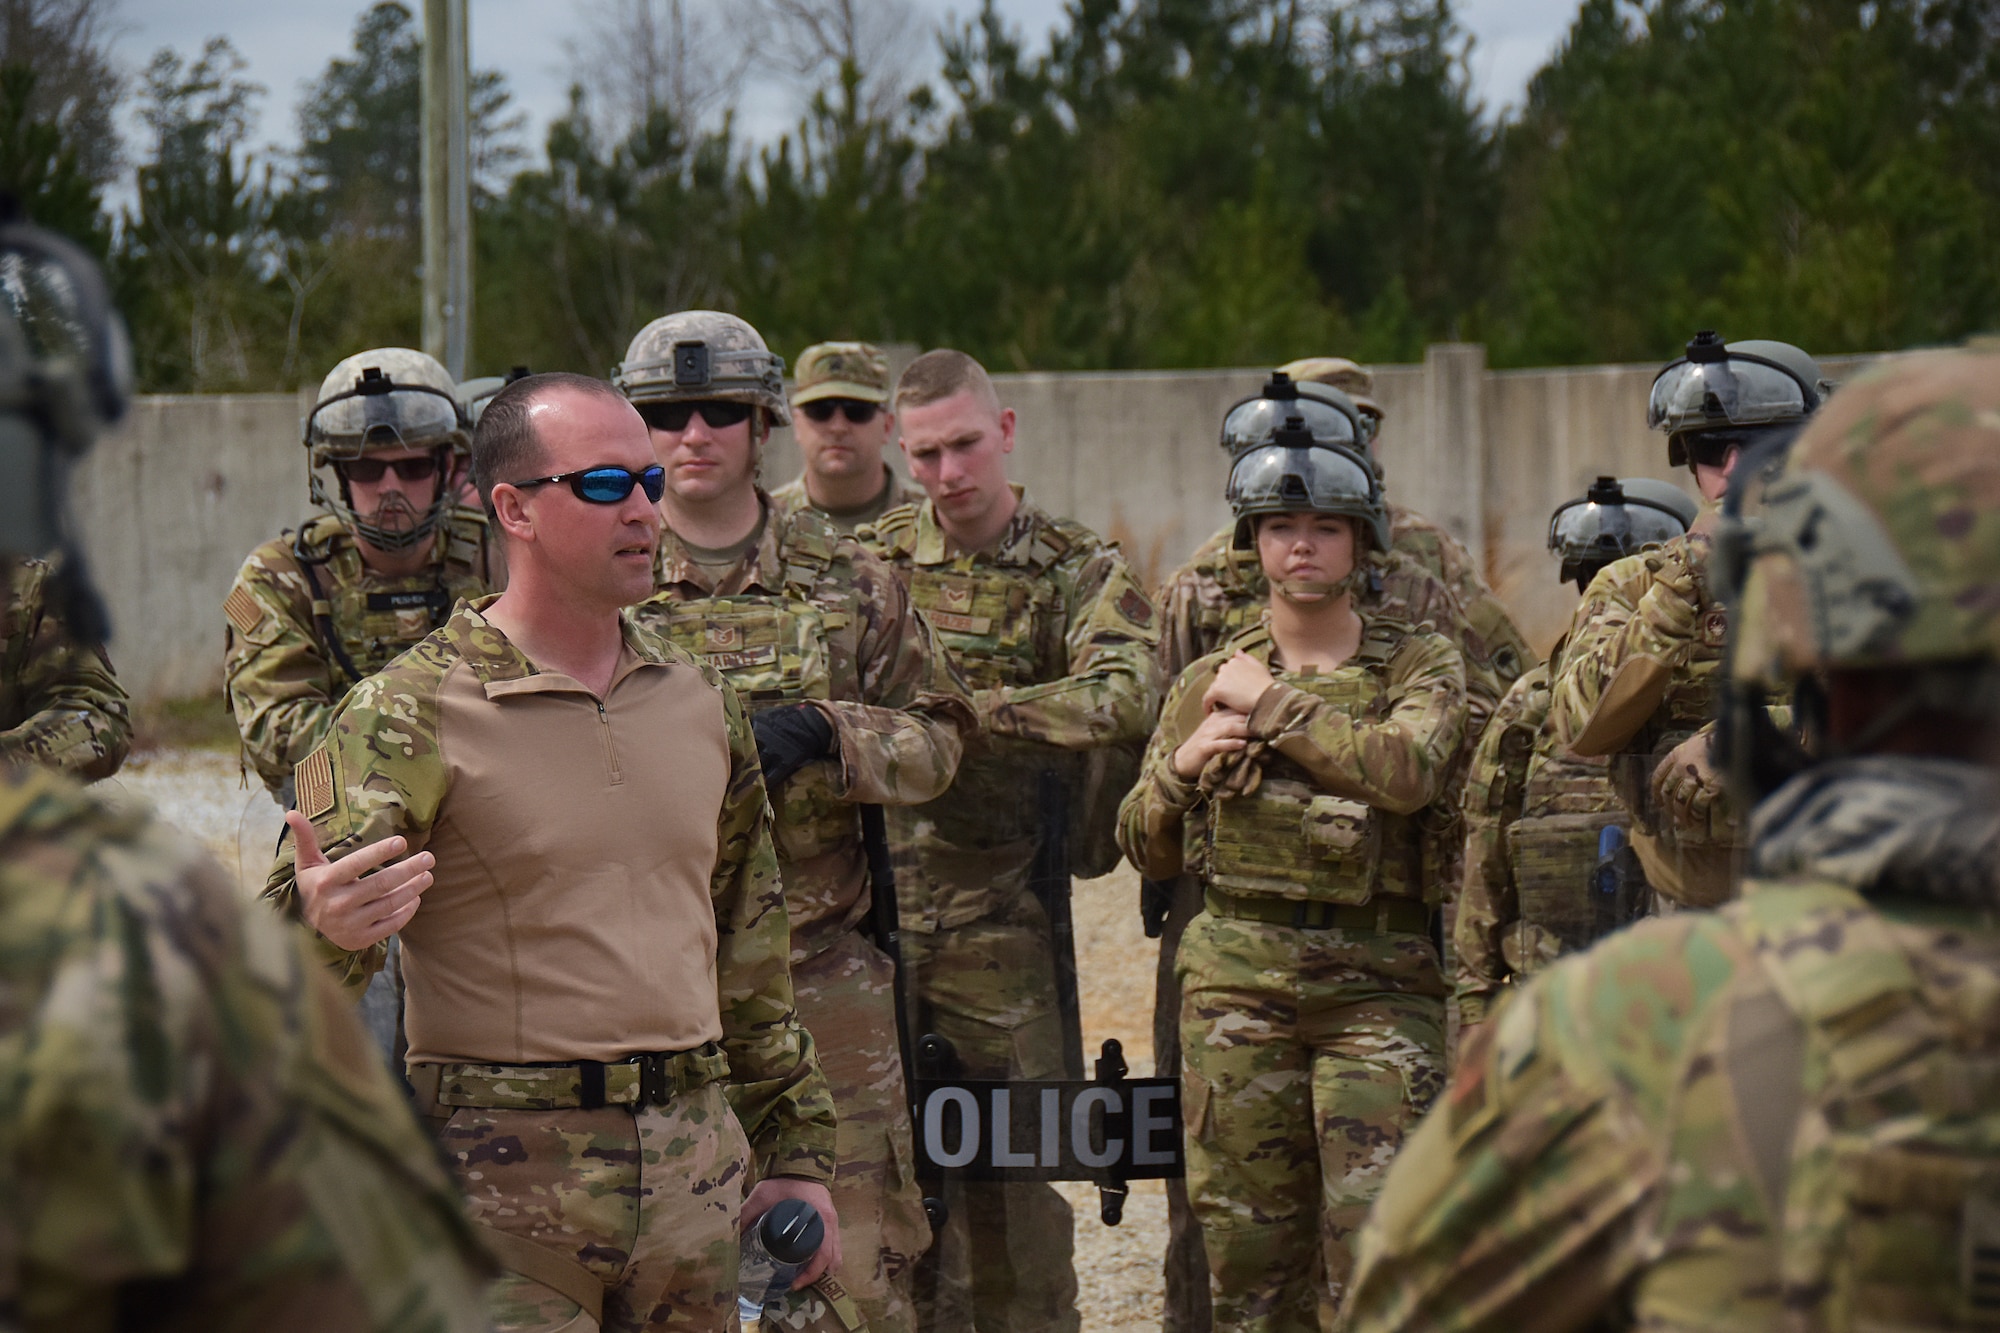 U.S. Air Force Master Sgt. Christopher Distel, assigned to the 178th Wing's Security Forces Squadron, Ohio Air National Guard, provides instruction during a training session at Patriot South, a domestic operations exercise at Camp Shelby, Mississippi, March 2, 2020. The 178th SFS lead a security execution with members from the 179th, 180th, and 121st, along with members from the Iowa and New Jersey Air National Guard in a support role to the Mississippi Department of Wildlife, Fisheries and Parks' Special Response Team. (U.S. Air National Guard photo by Capt. Lou Burton)